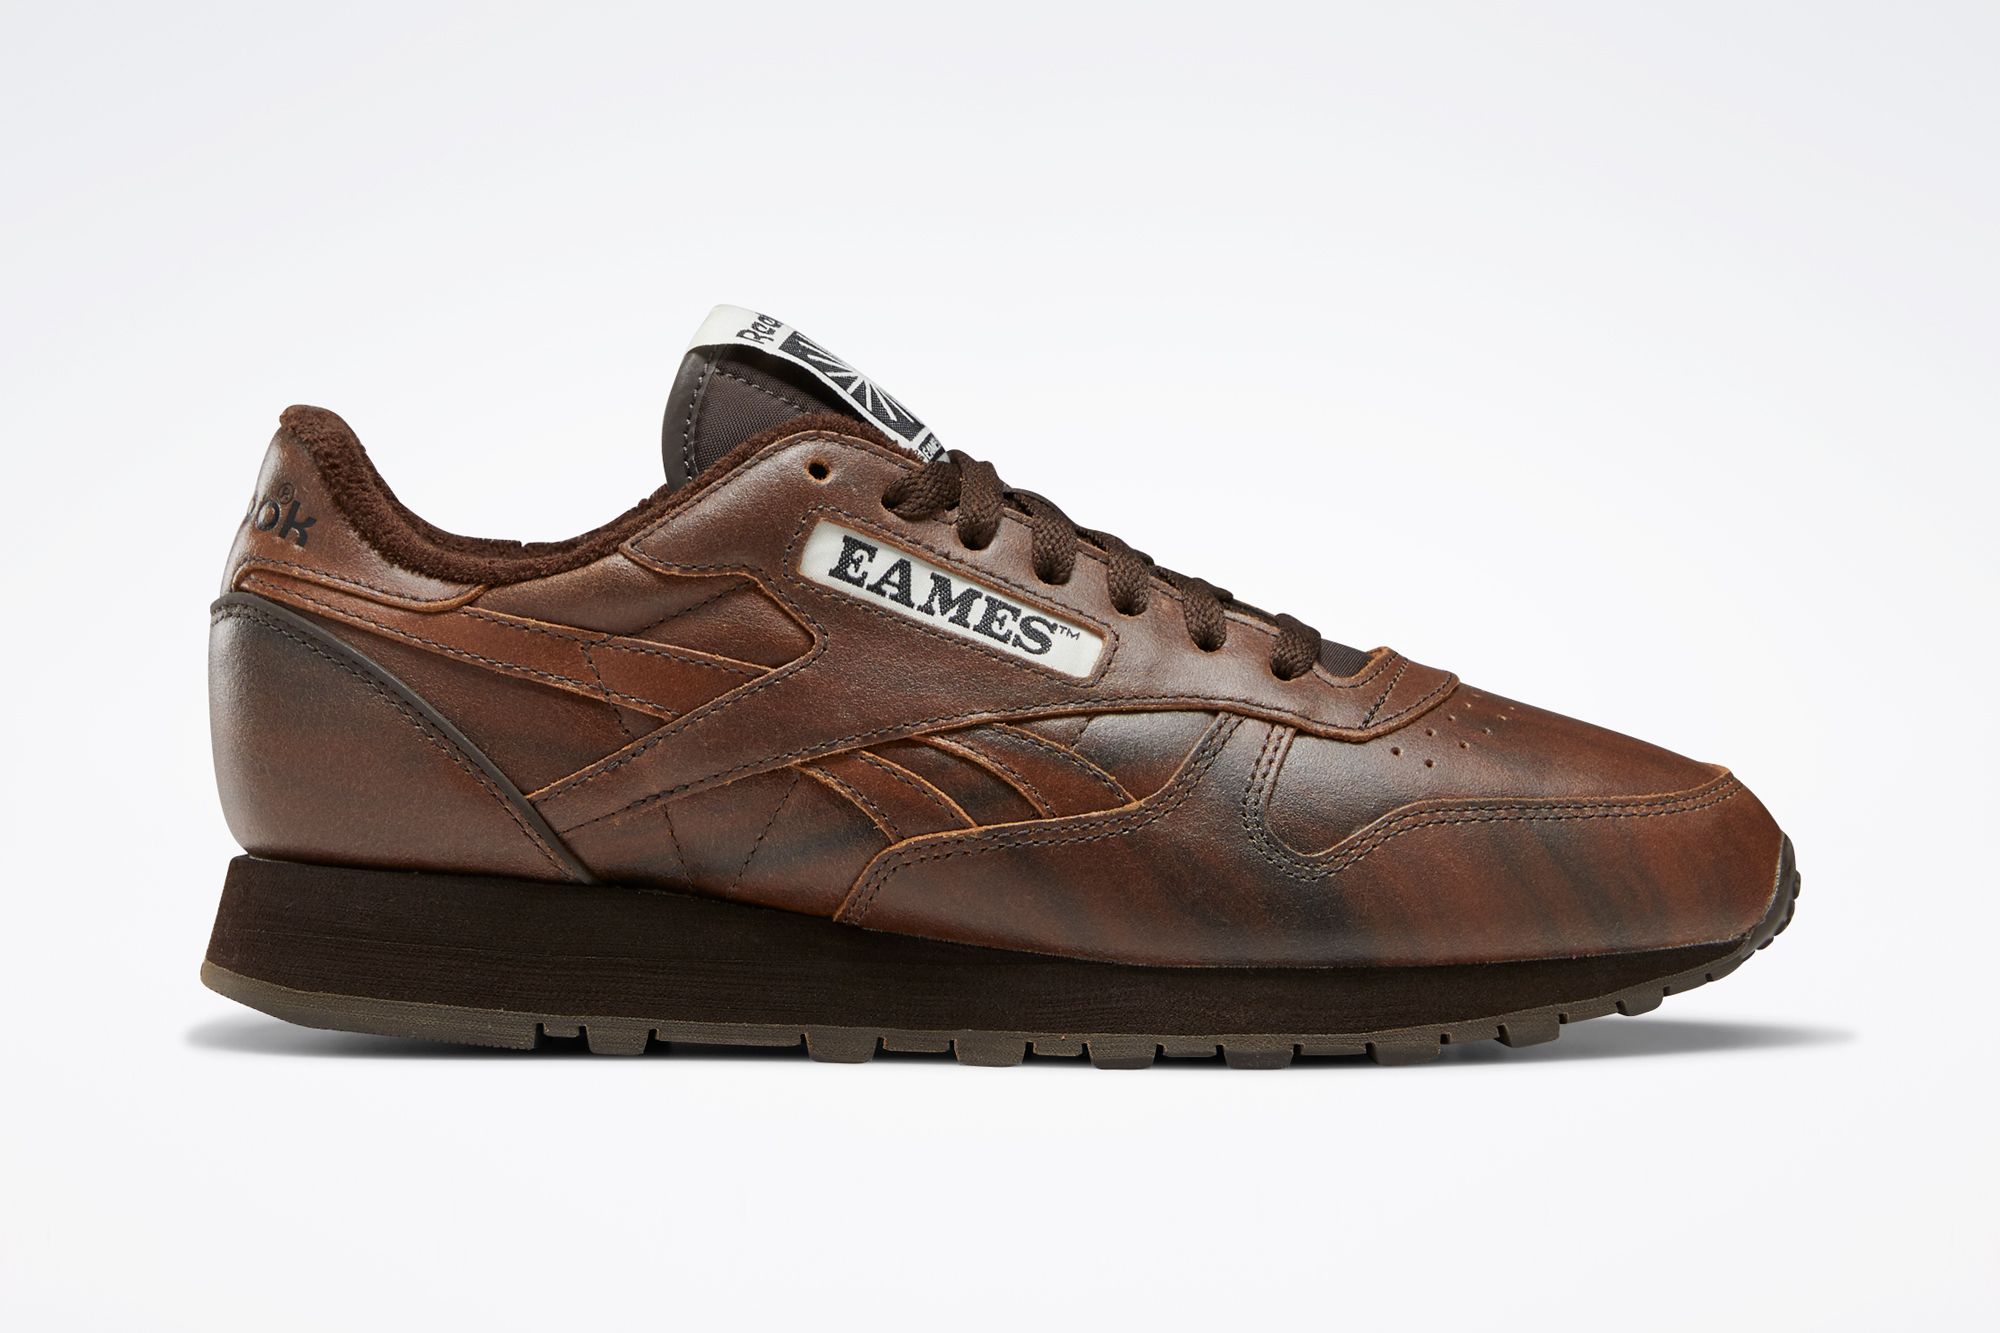 Eames x Reebok Classic Leather 'Rosewood'